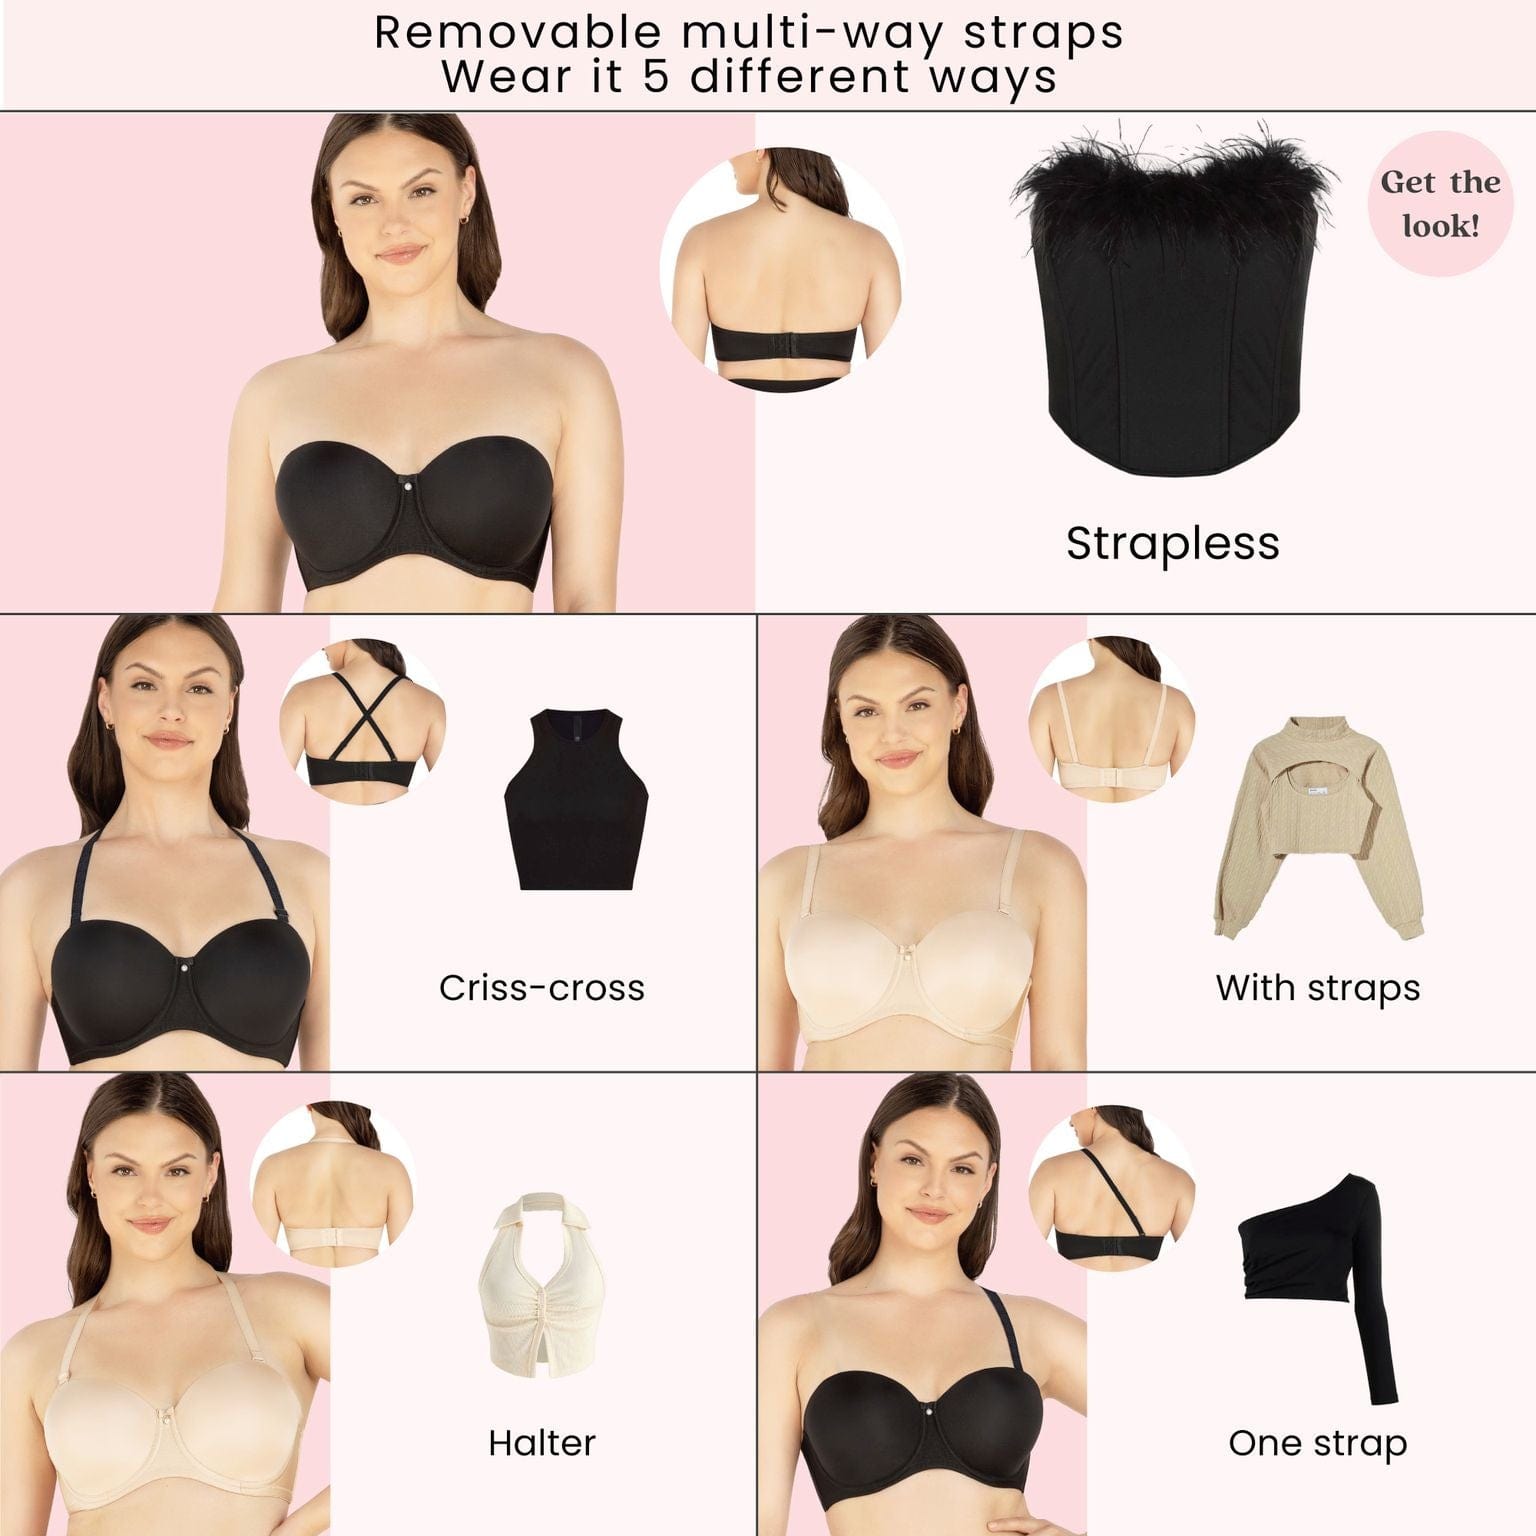 Why Won't My Strapless Bra Stay Up? - ParfaitLingerie.com - Blog